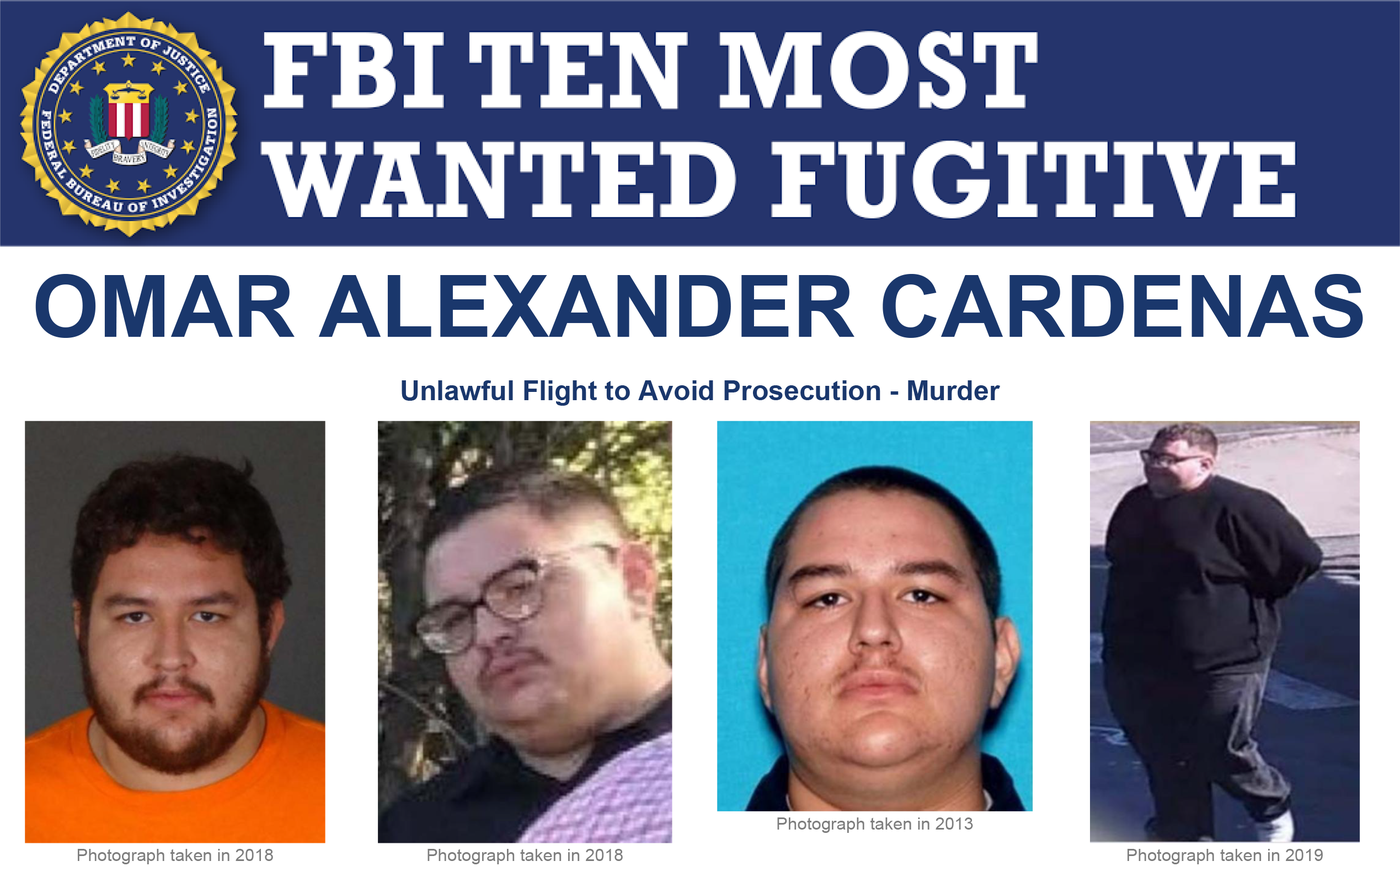 A screenshot of the Ten Most Wanted Fugitive poster for Omar Alexander Cardenas